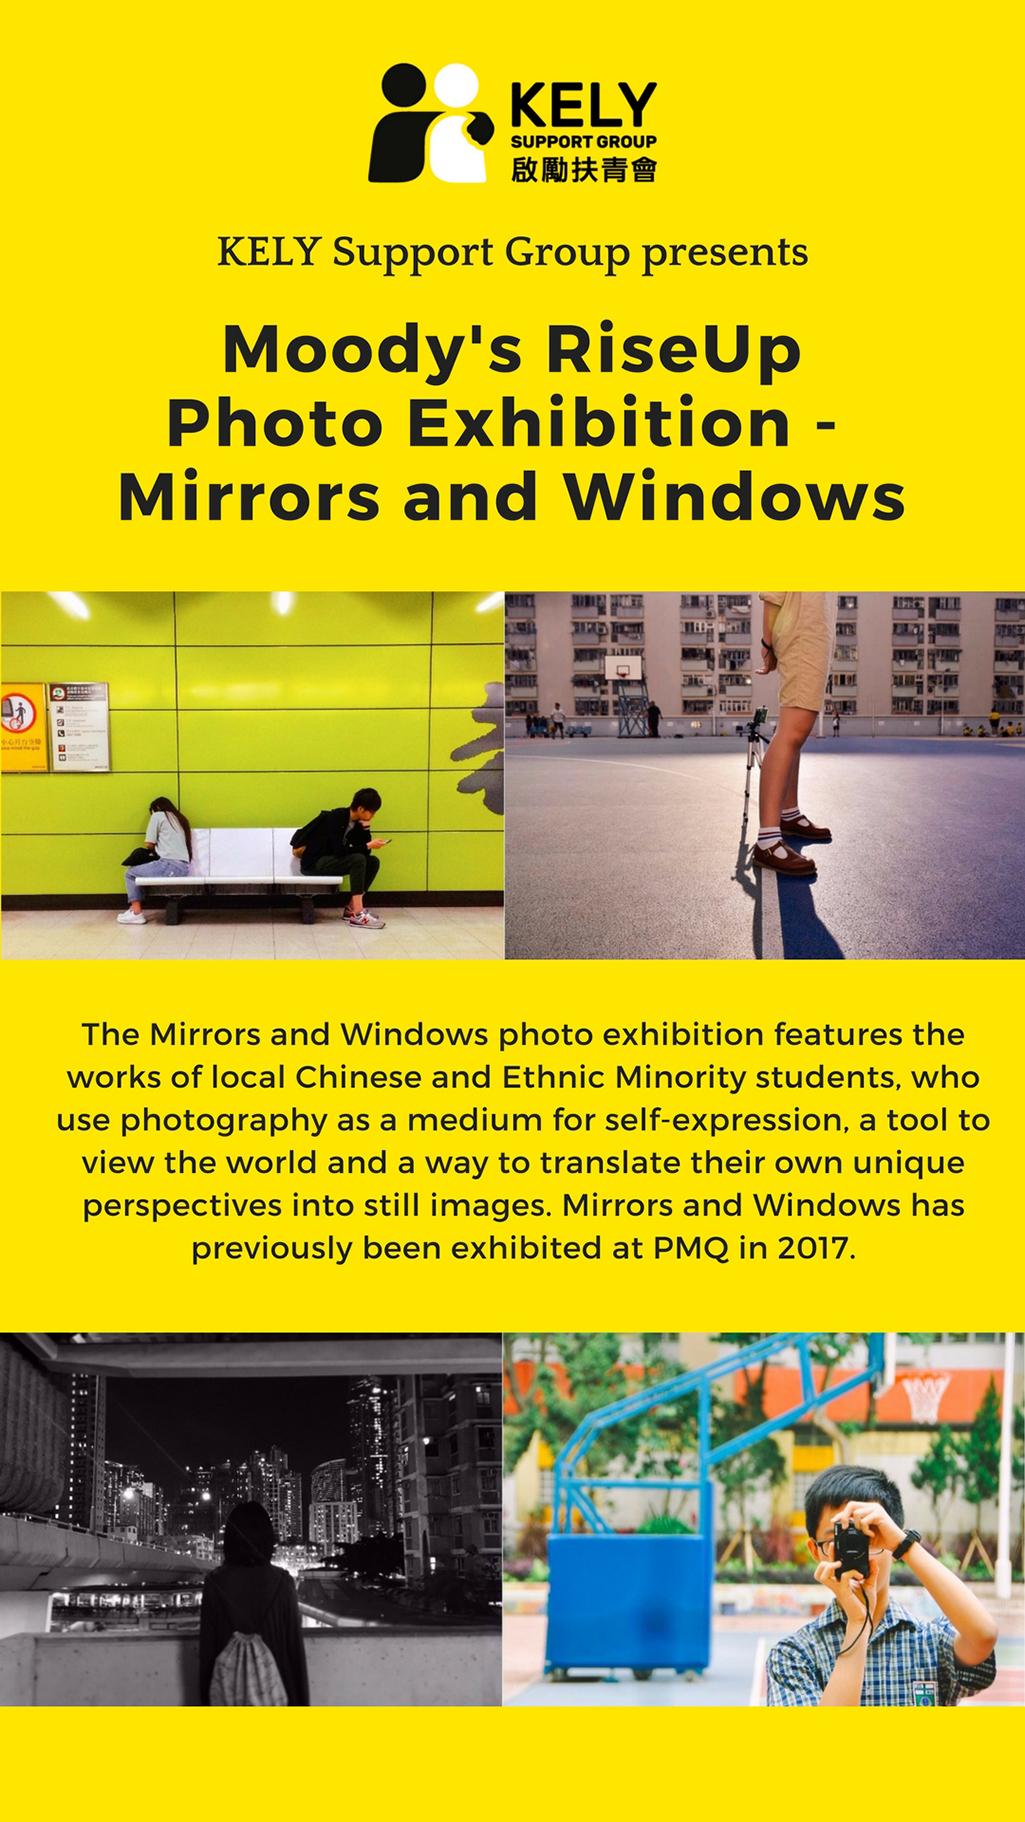 Moody's RiseUp Photo Exhibition — Mirrors and Windows